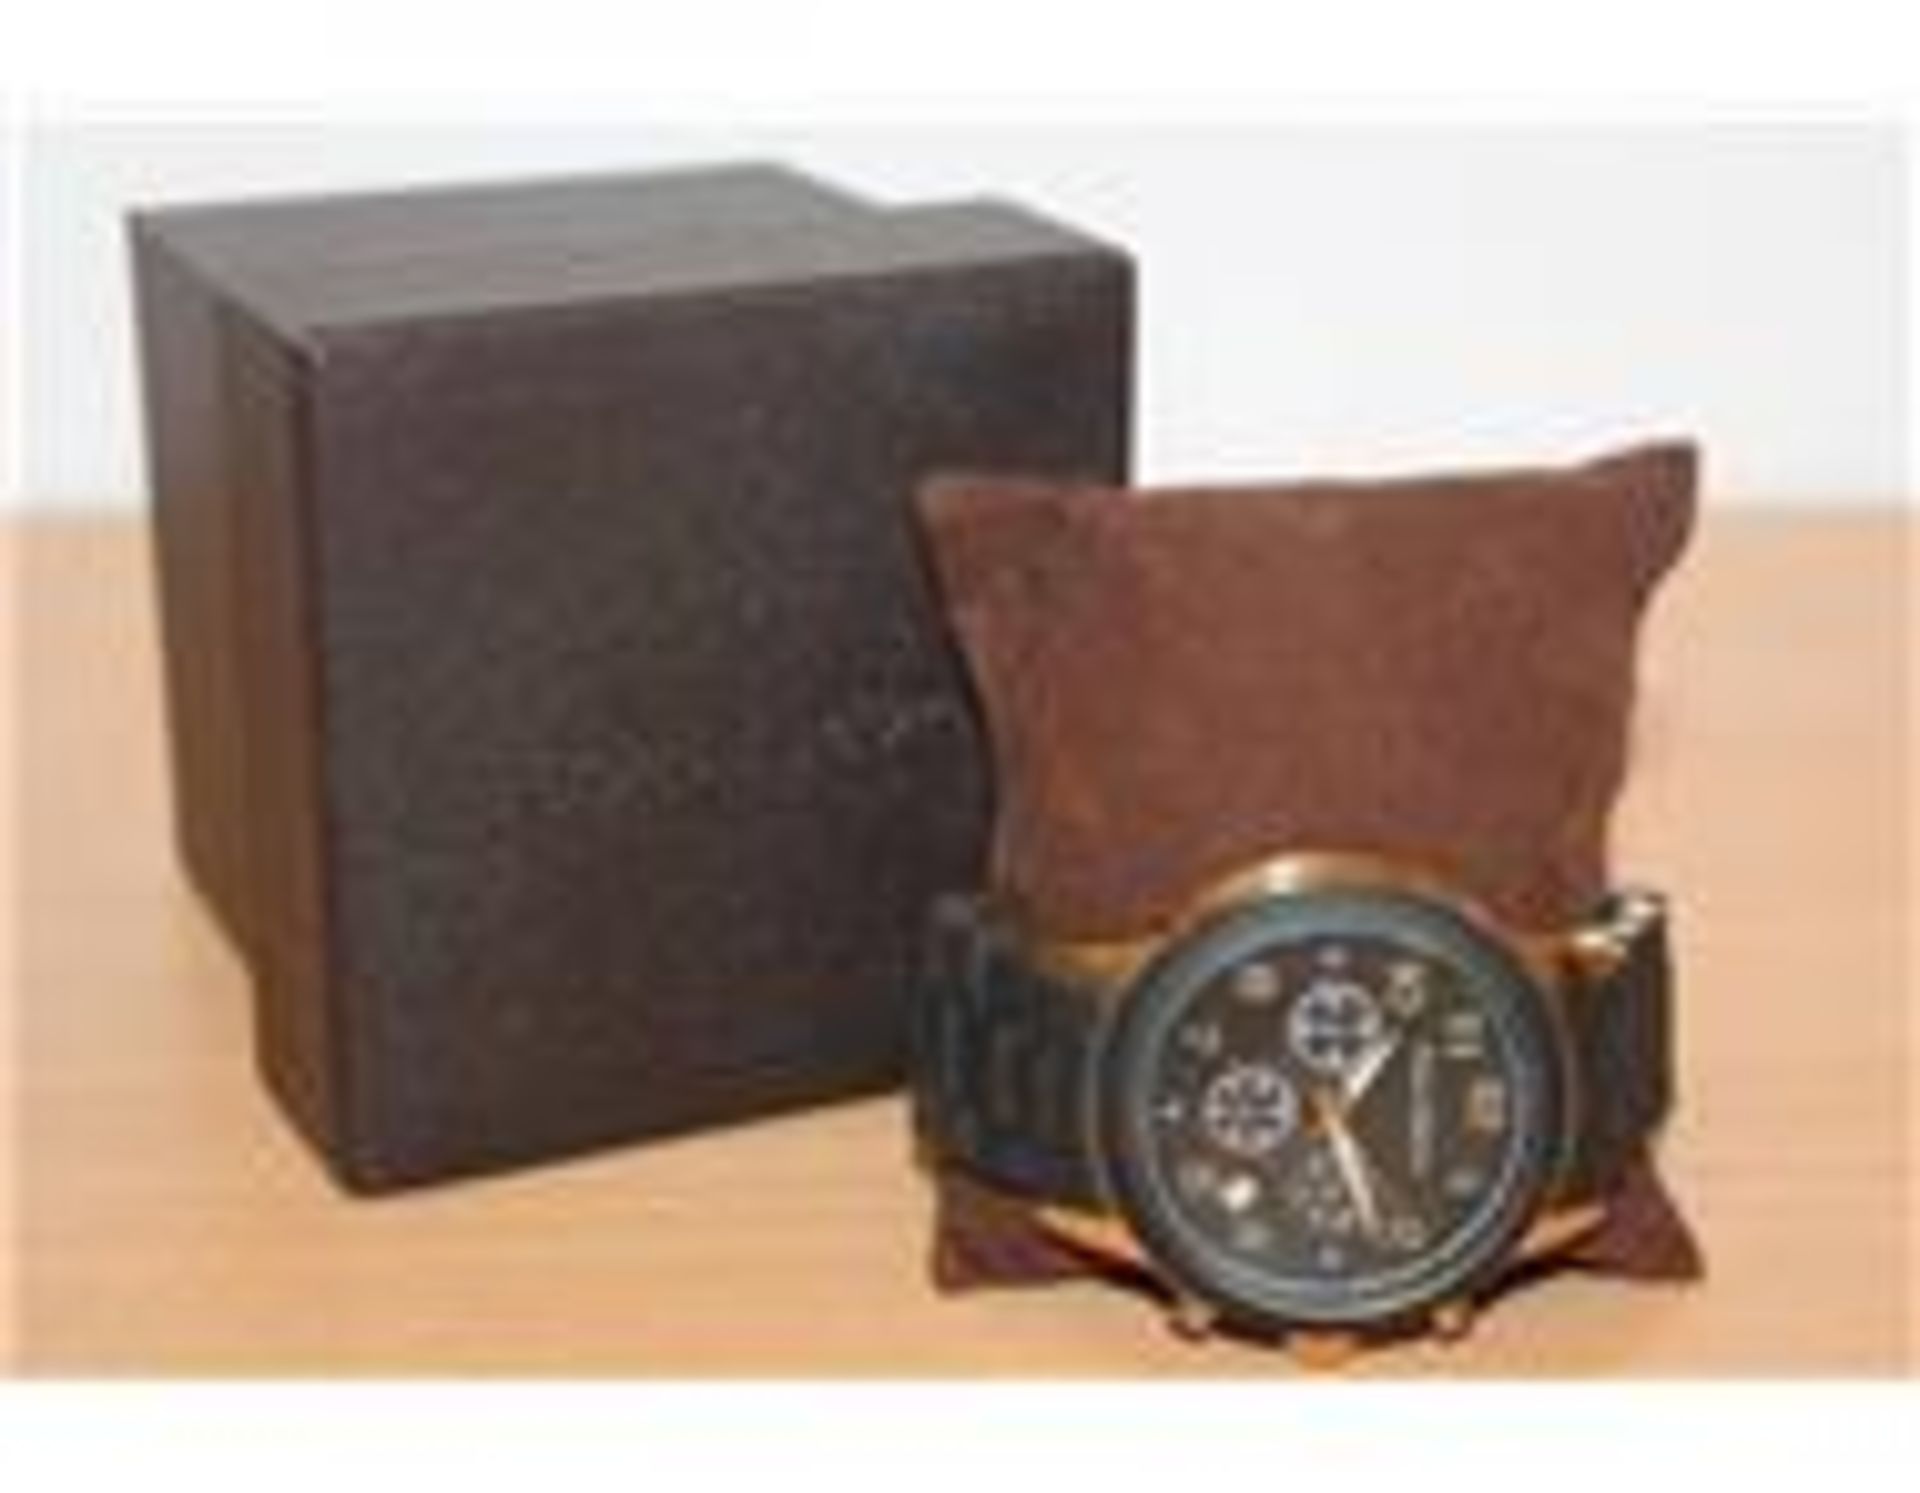 NO VAT!!! Beau Amore Designer Black and Gold watch in the style of the Michael Kors classic. New,